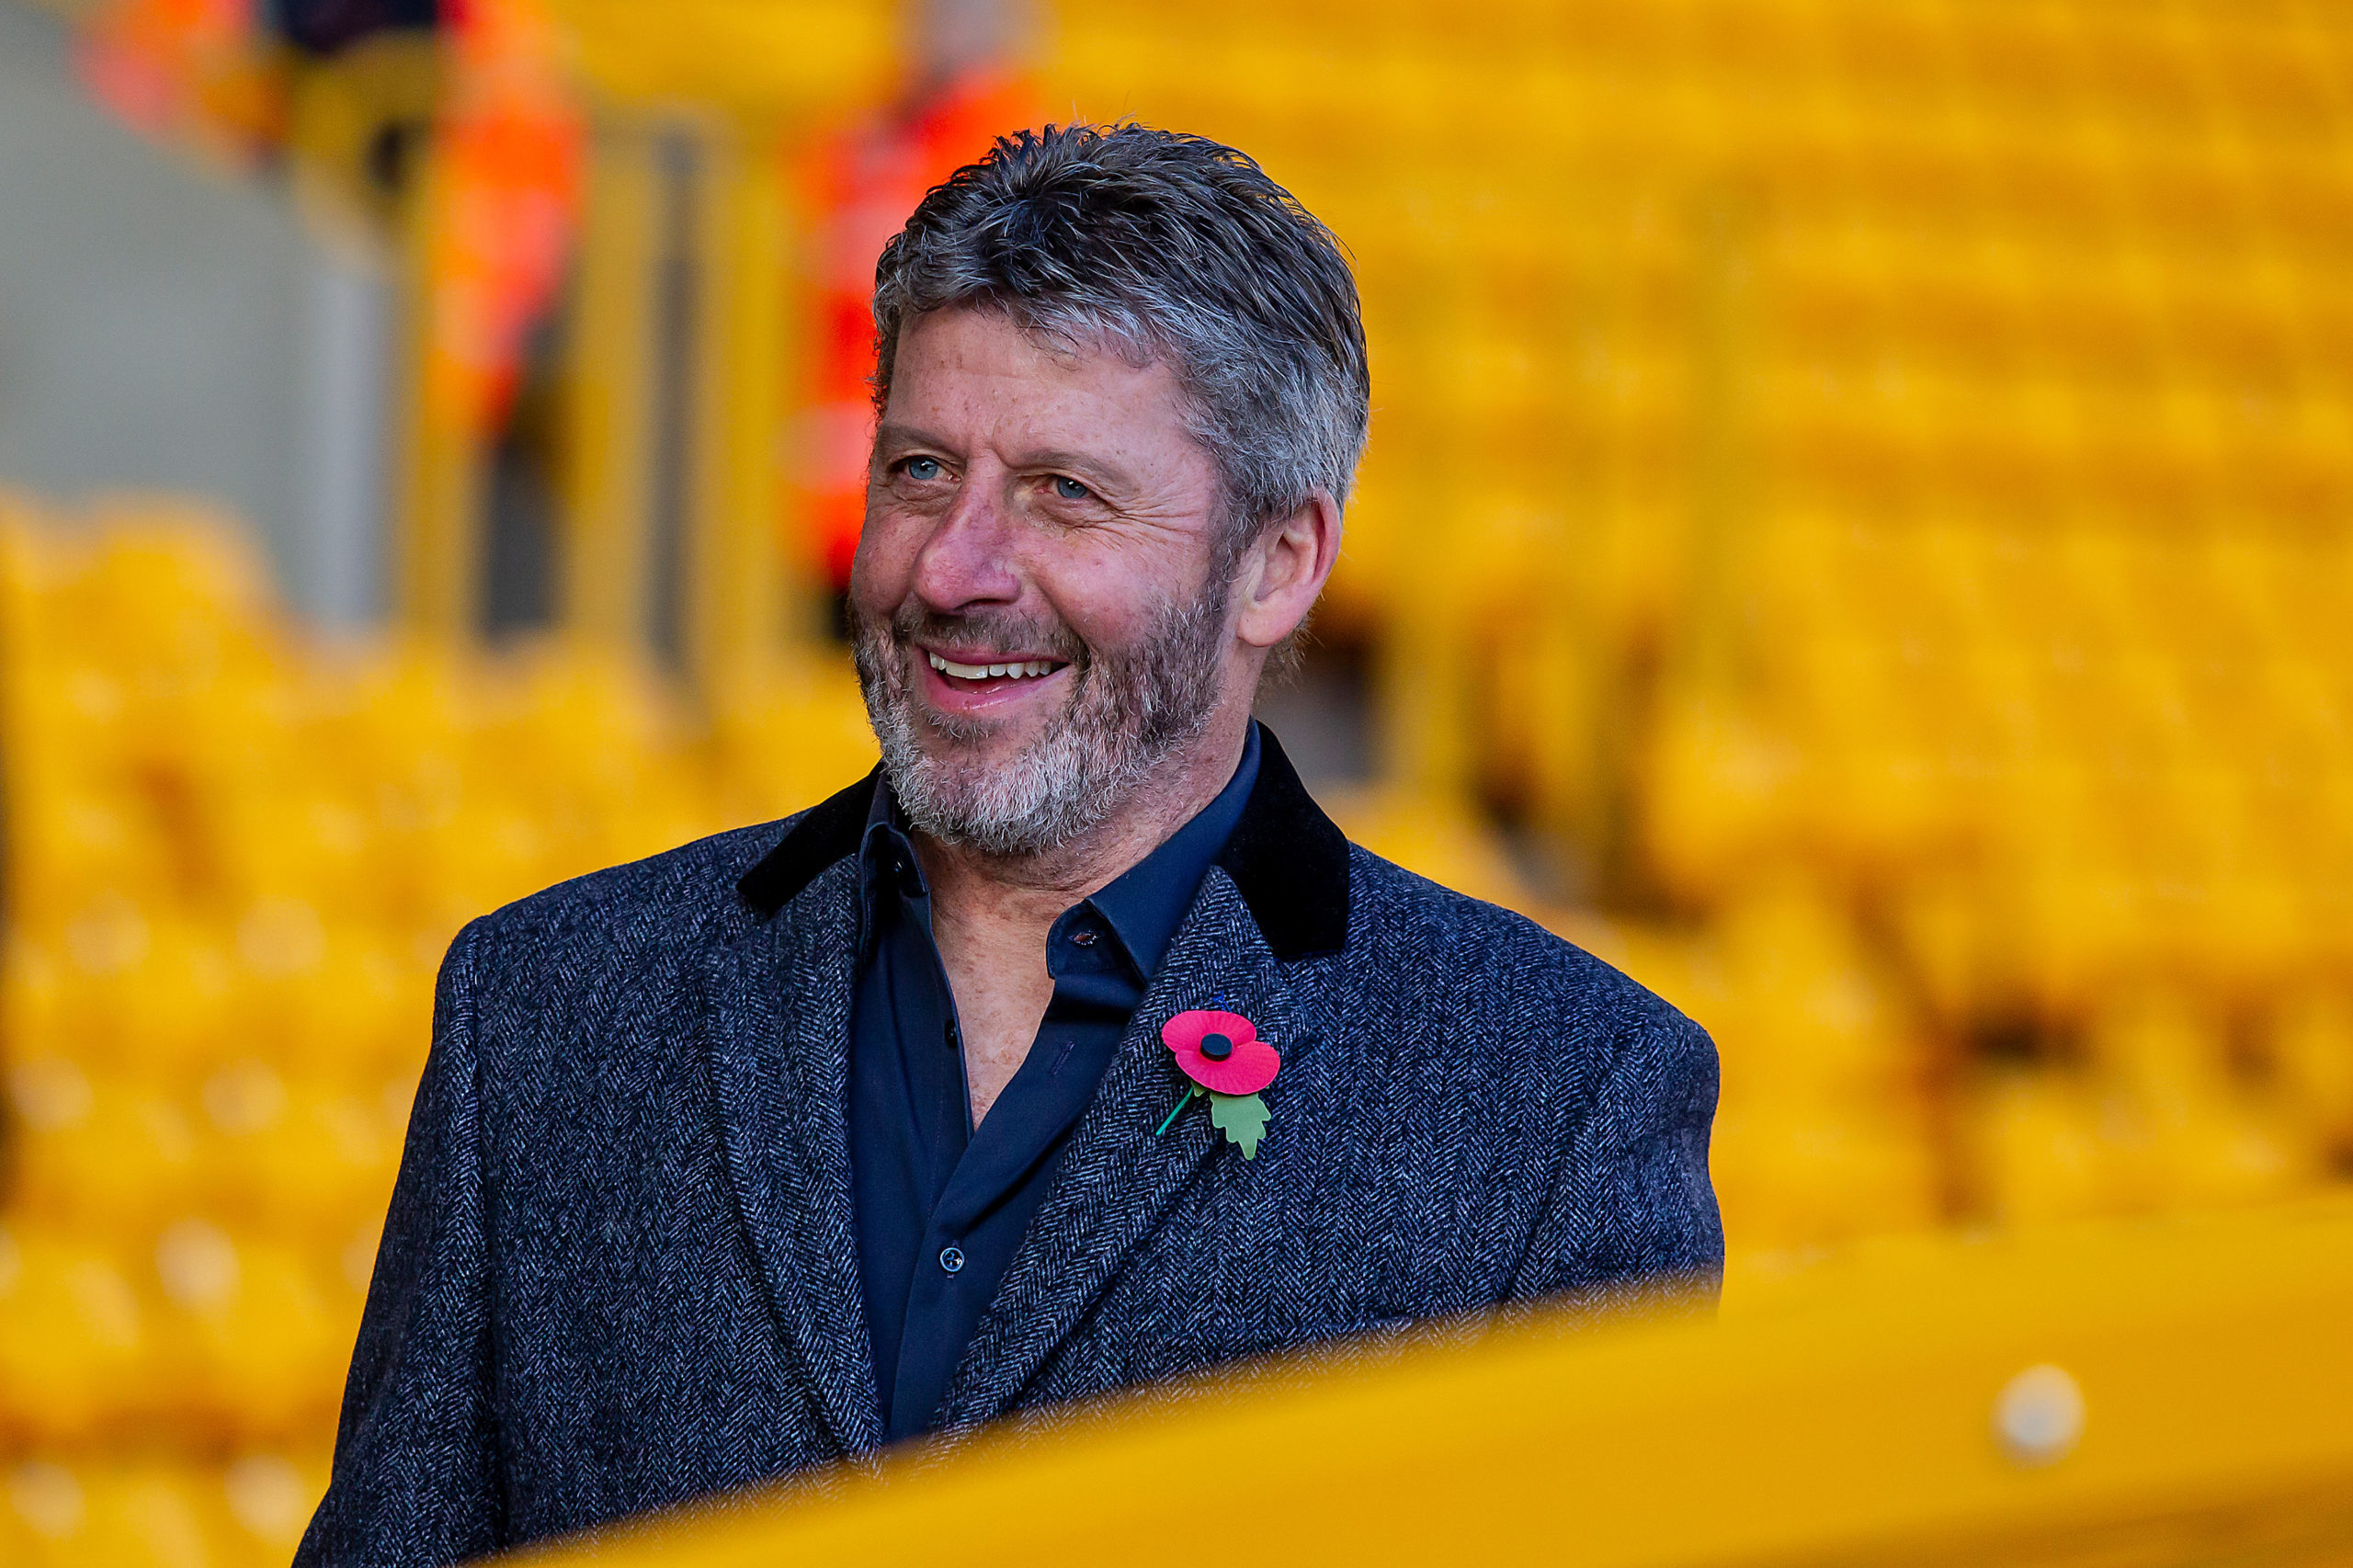 'It's been weird': Andy Townsend says it's 'strange' that Chelsea player has been overlooked by Tuchel